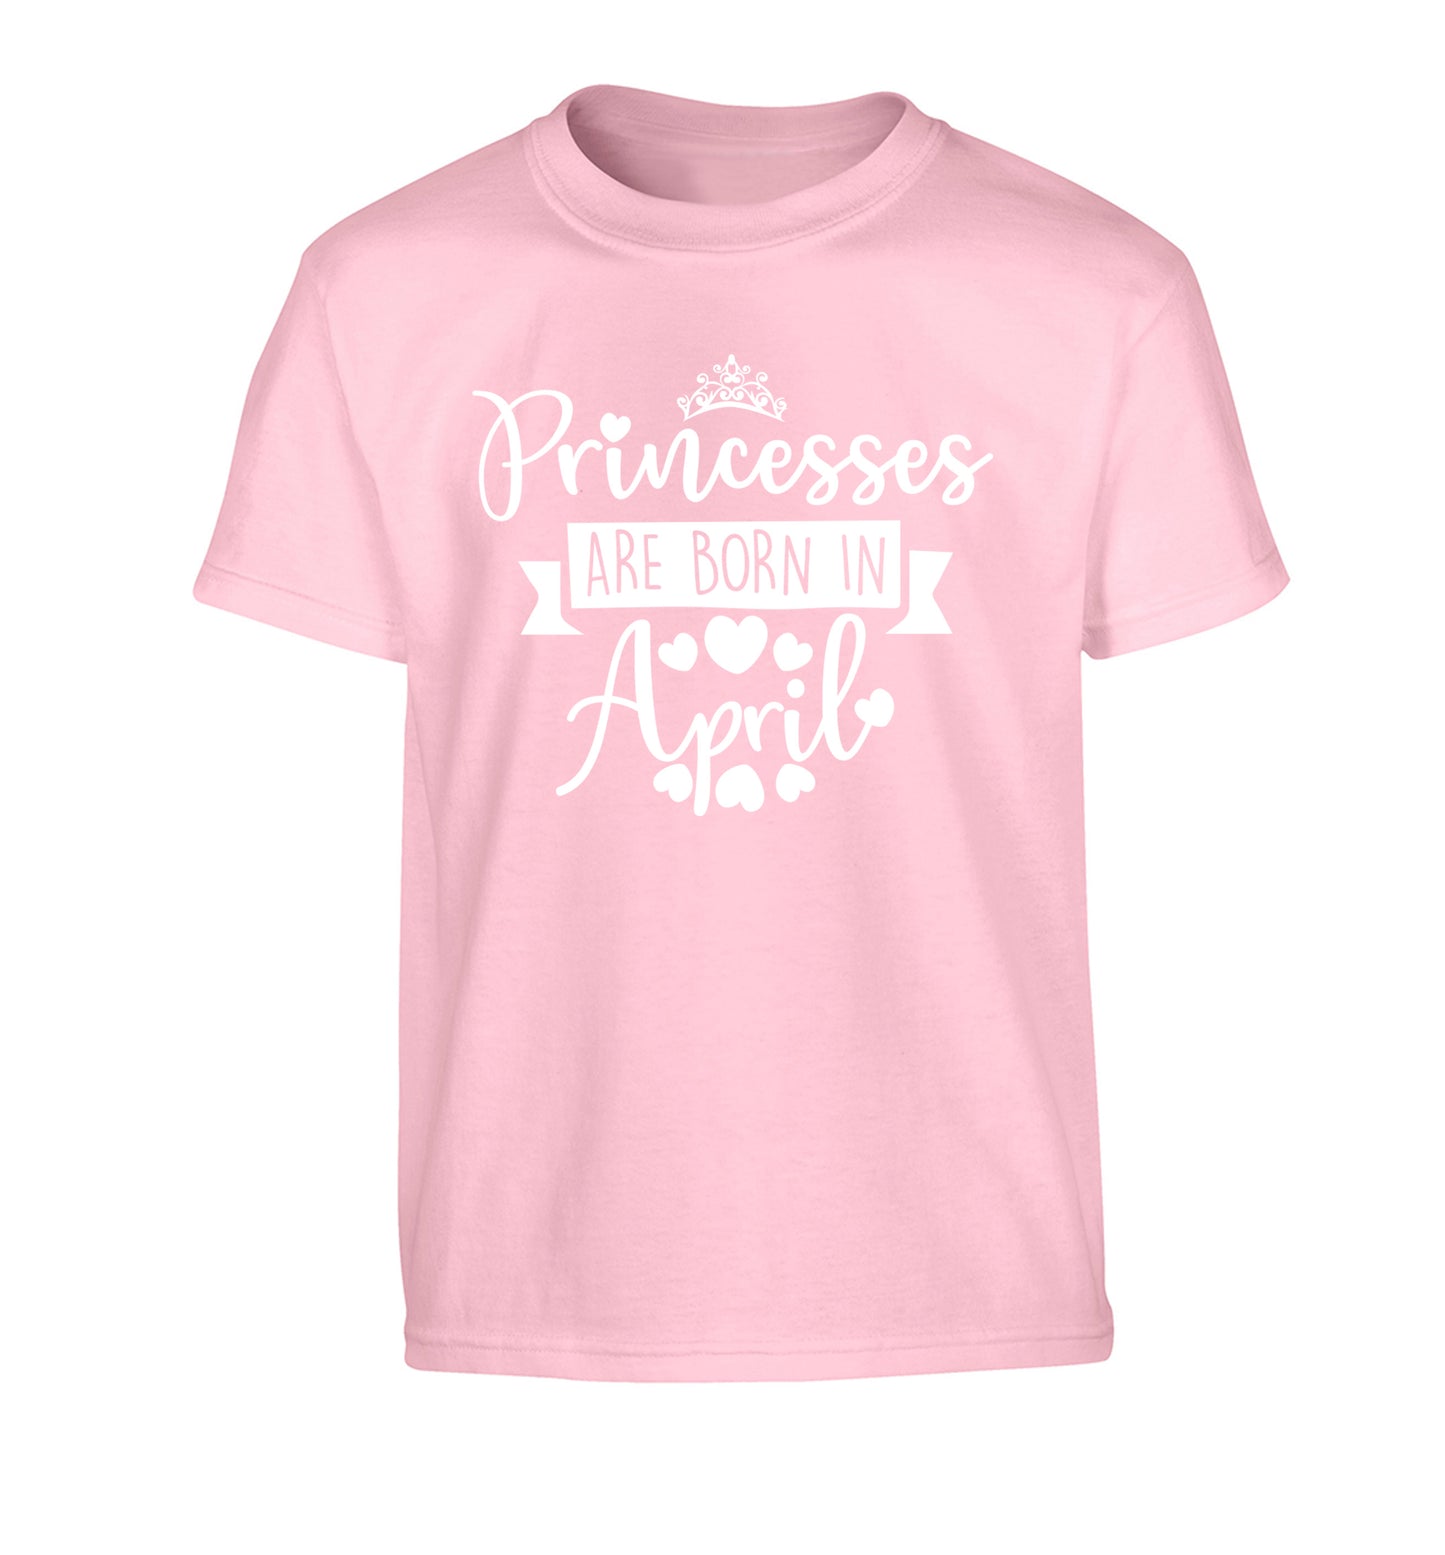 Princesses are born in April Children's light pink Tshirt 12-13 Years